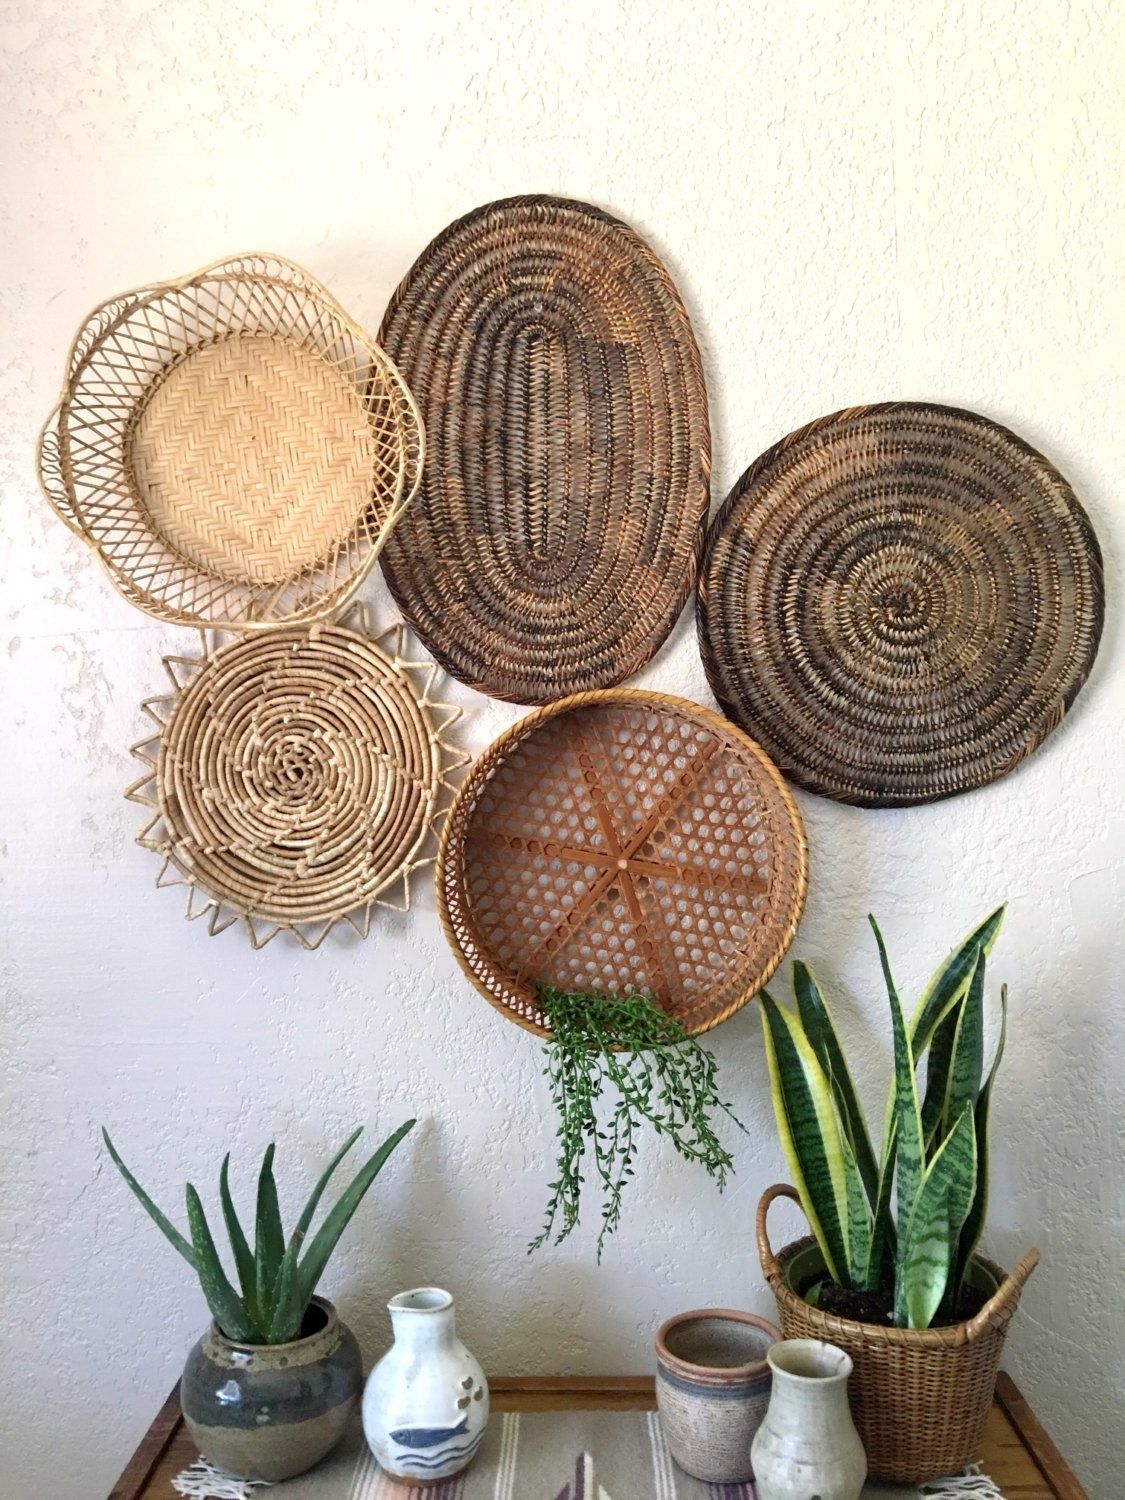 Vintage Oval Brown Woven Wicker Basket / Trivet / Placemat / Wall Art Throughout Woven Basket Wall Art (View 13 of 20)